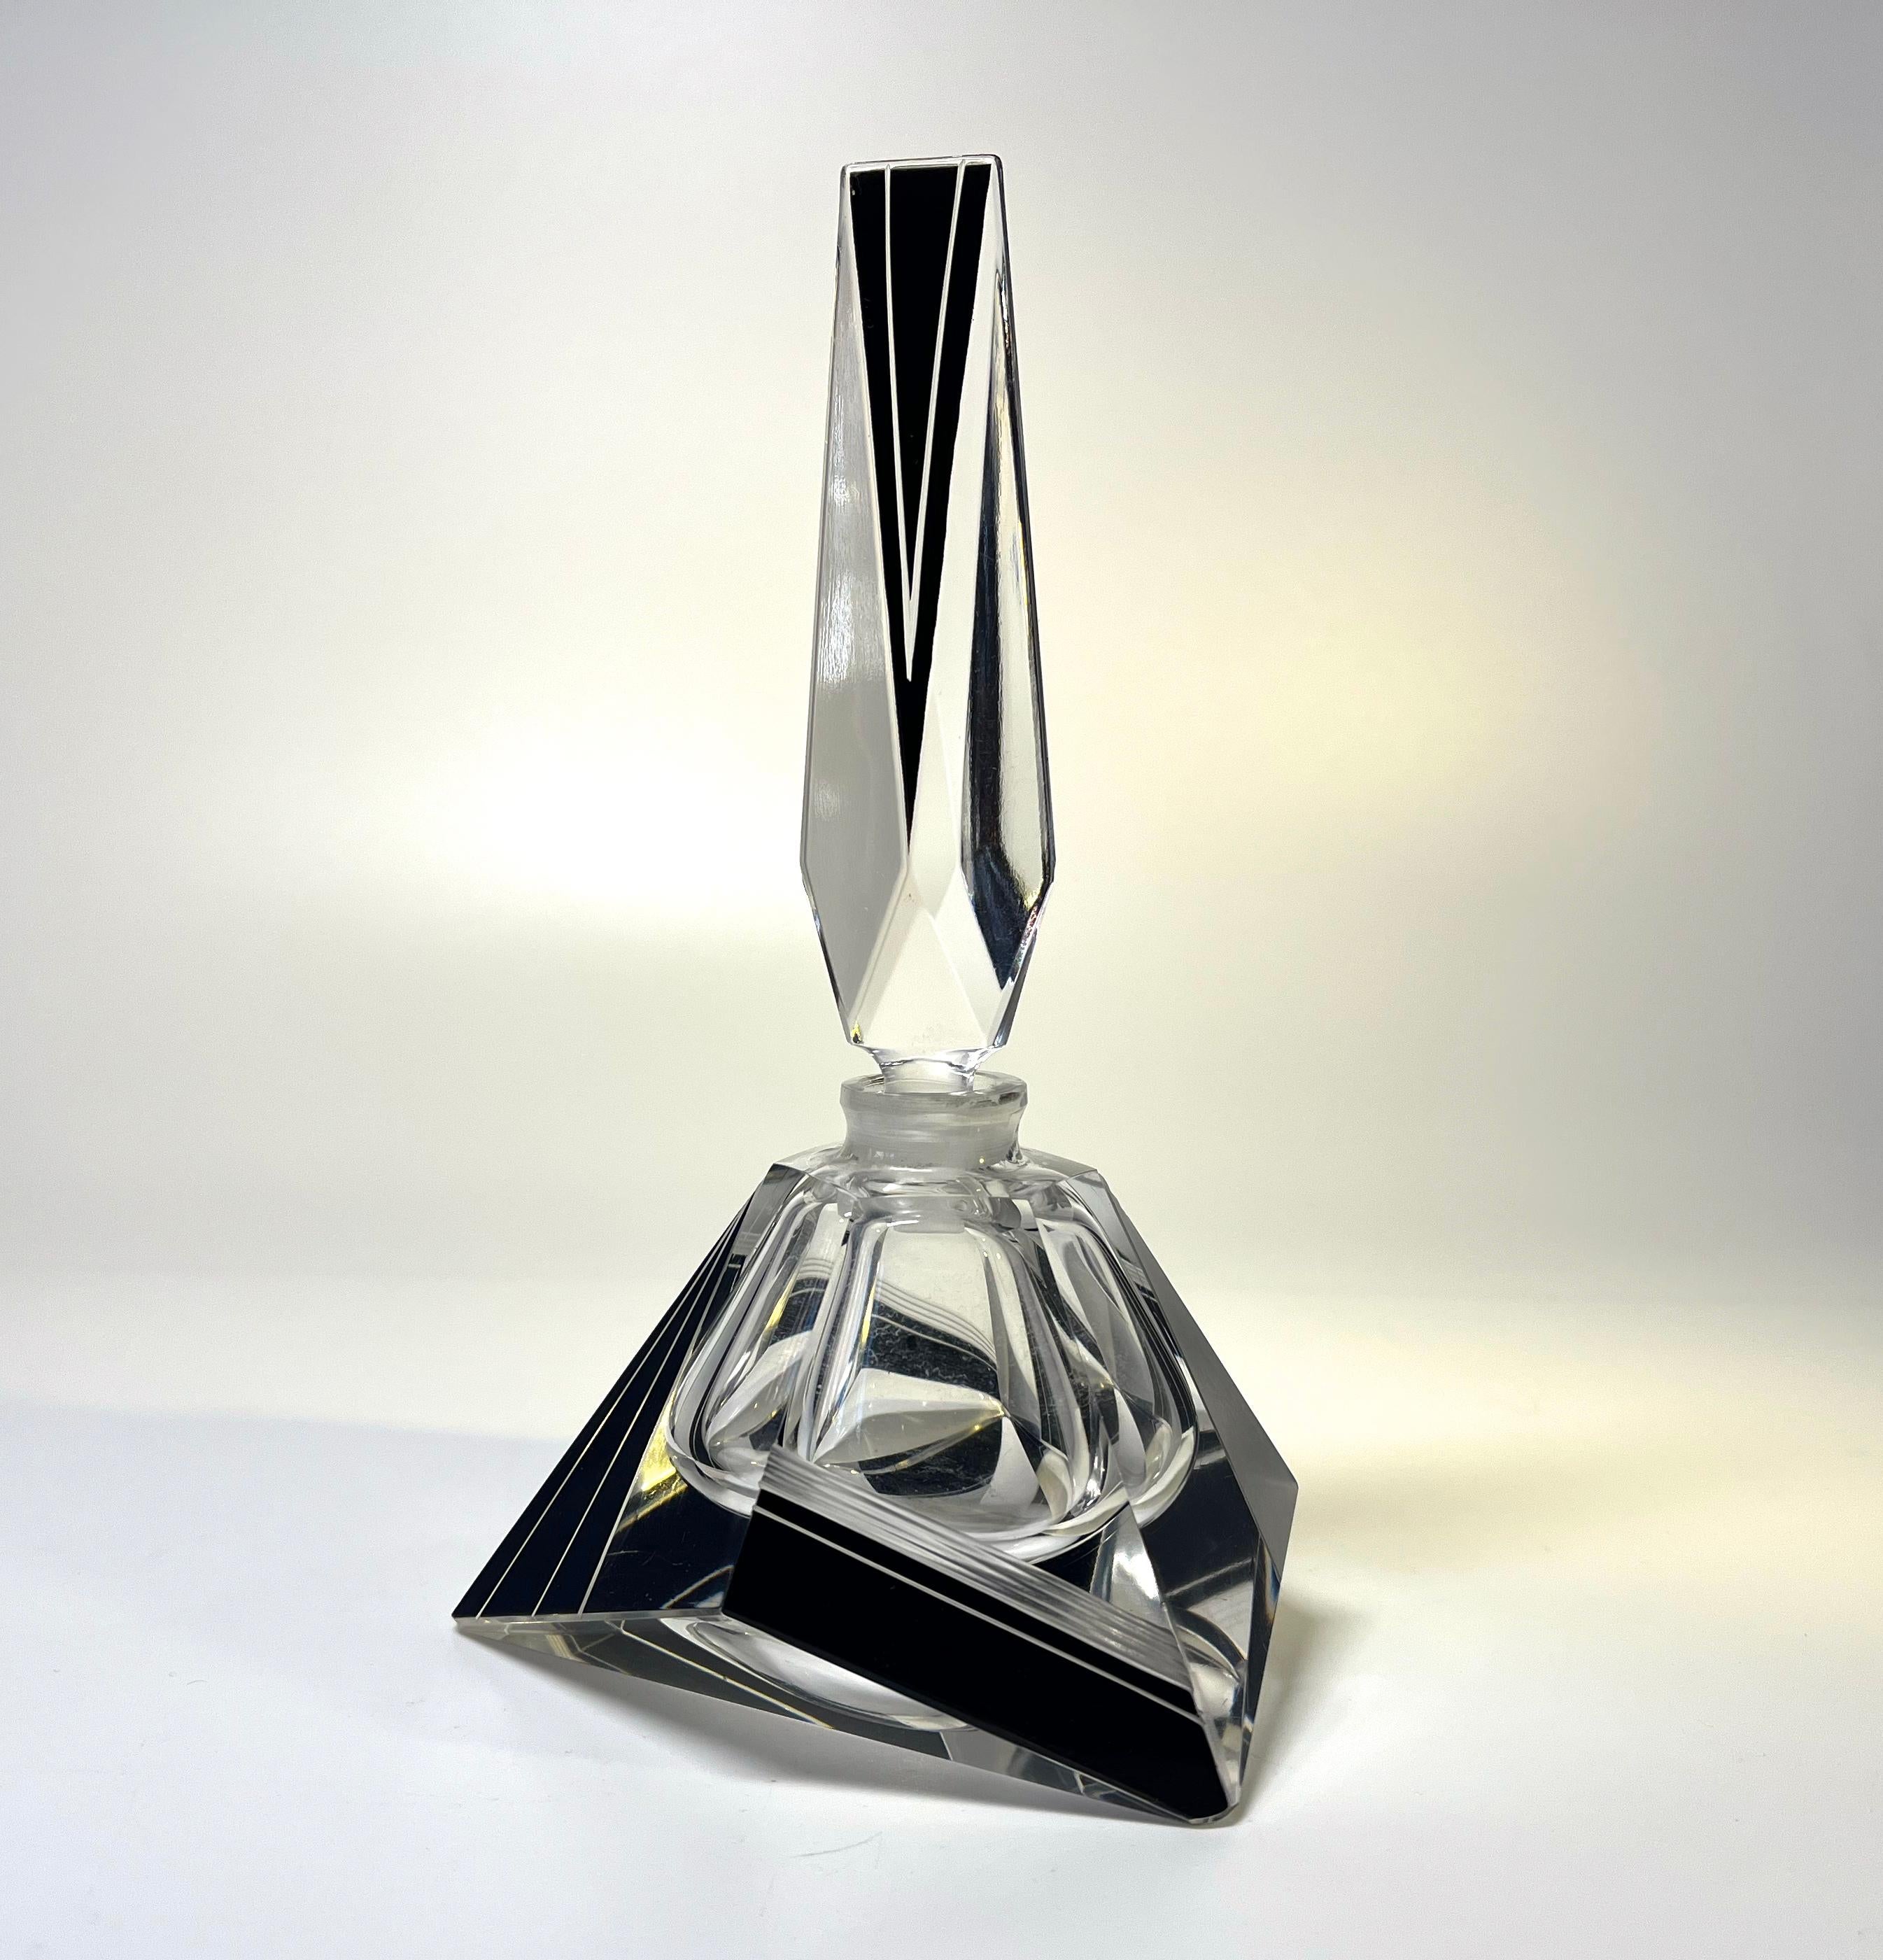 Supreme geometric and angular shaped Czech crystal Art Deco perfume bottle
Clean geometric lines on black enamel. 
Vintage Bohemian, Czech crystal 
Circa 1930's
Height 6.25 inch, Width 3.5 inch, Depth 3.75 inch 
Exceptionally good condition.